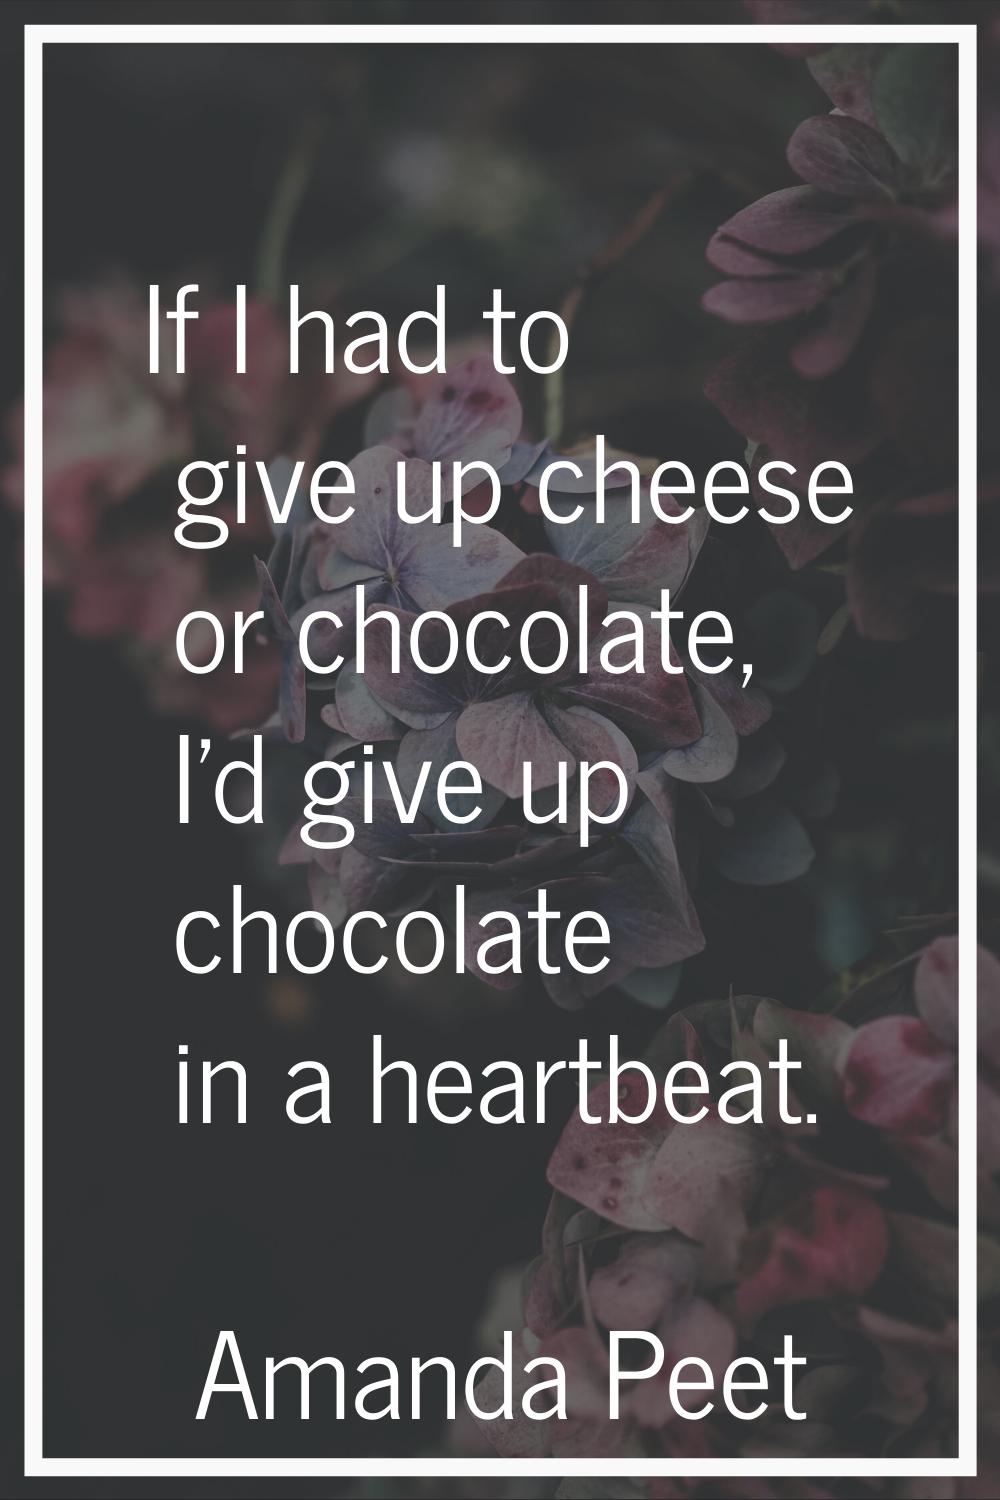 If I had to give up cheese or chocolate, I'd give up chocolate in a heartbeat.